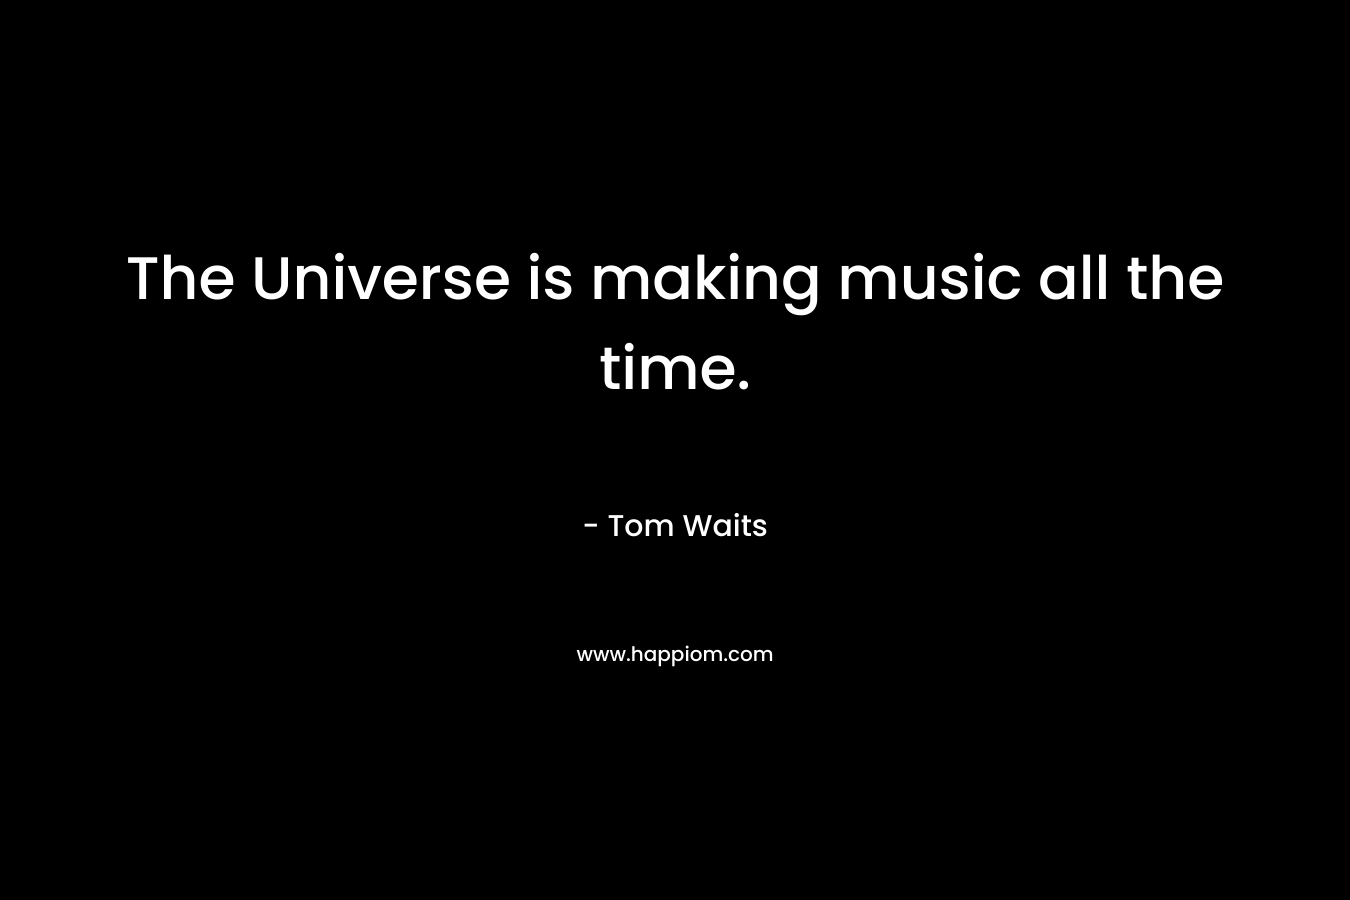 The Universe is making music all the time.